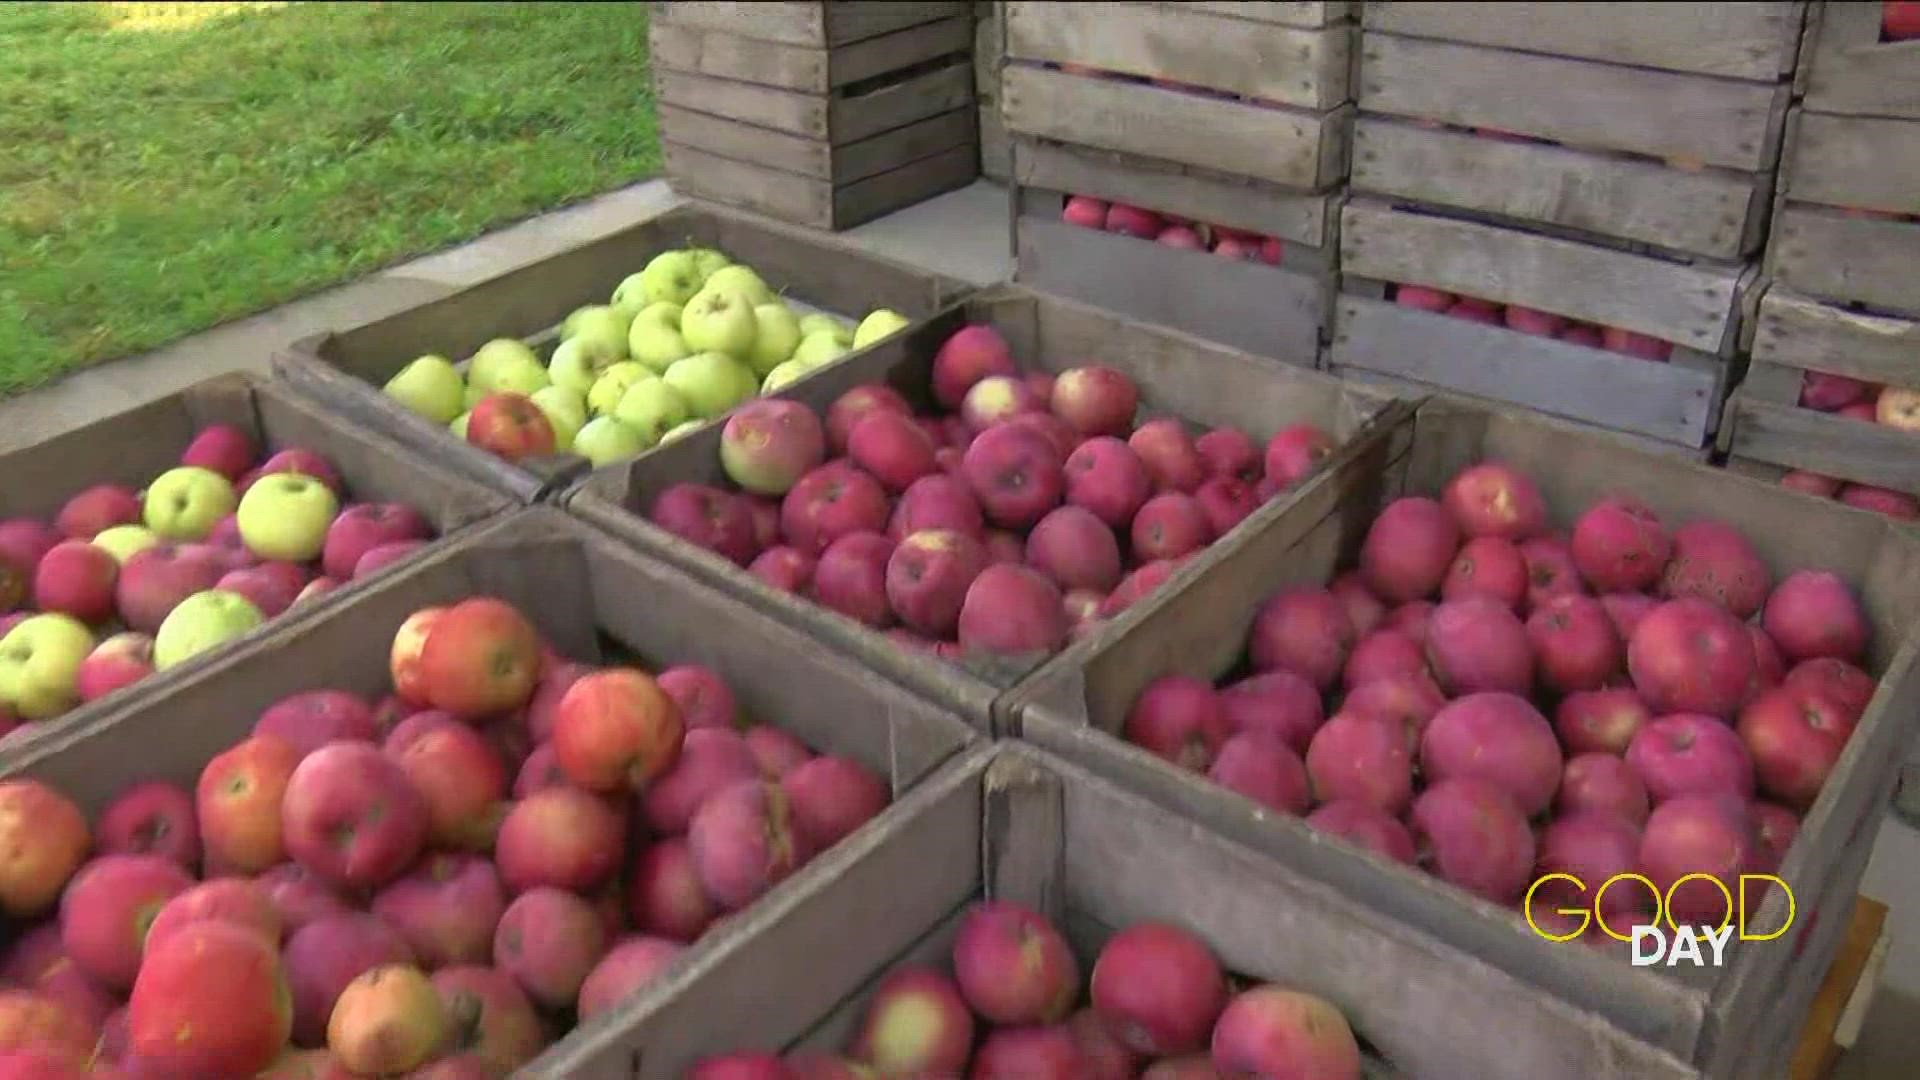 Ramp up for fall with Sauder Village during their 'Apple Week' which celebrates the versatility of a classic Ohio fruit.